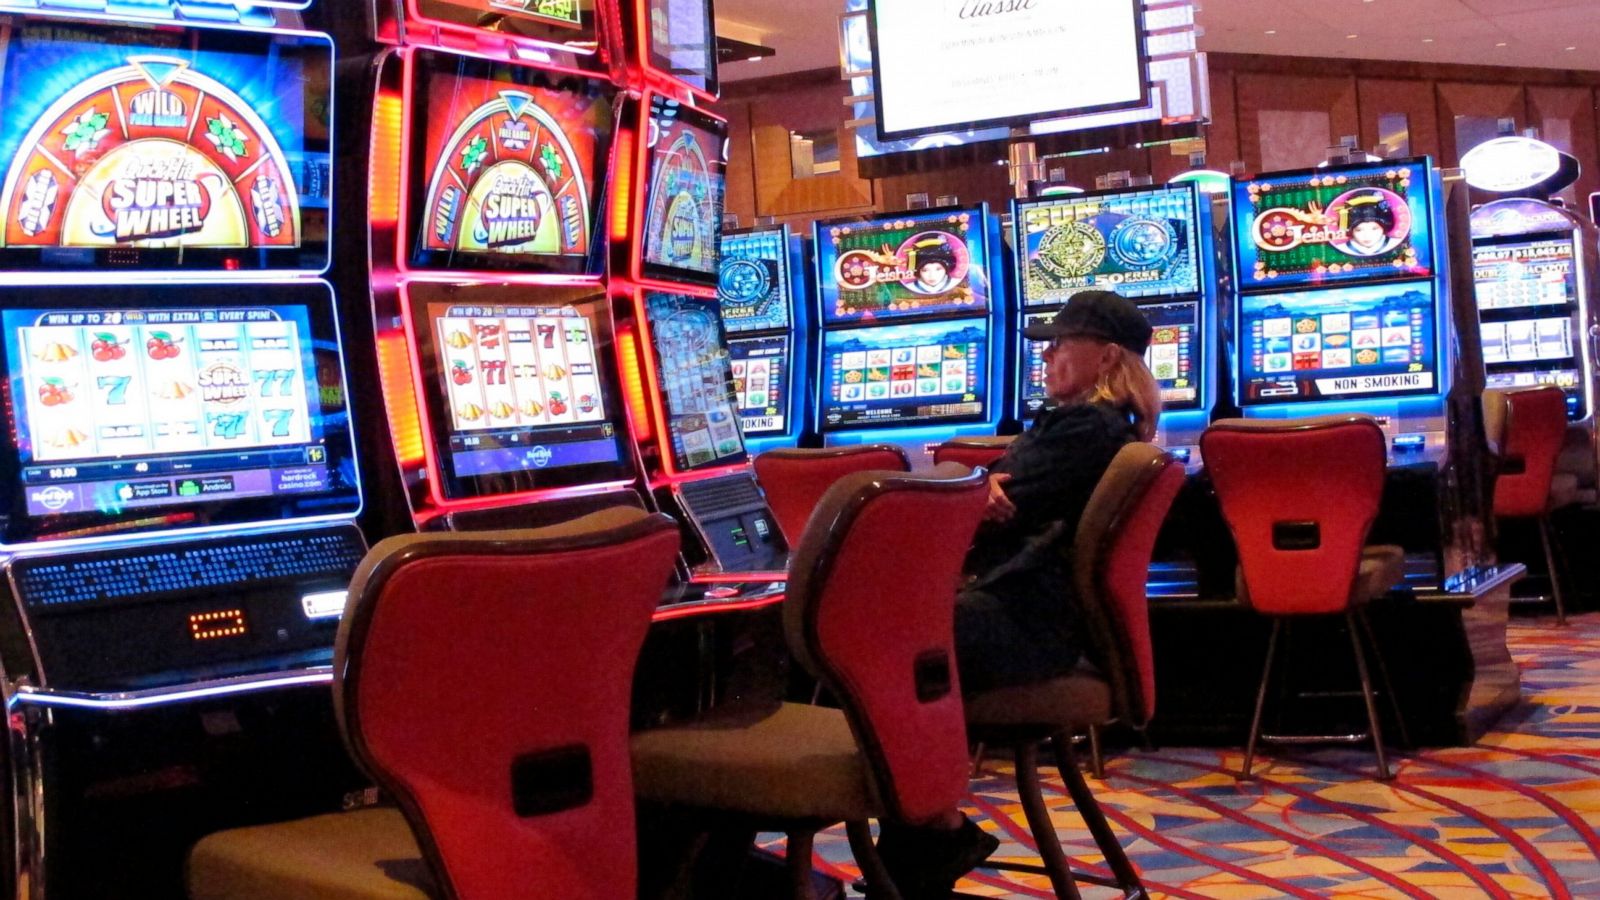 Masks, separated slots, more cleaning once casinos reopen - ABC News